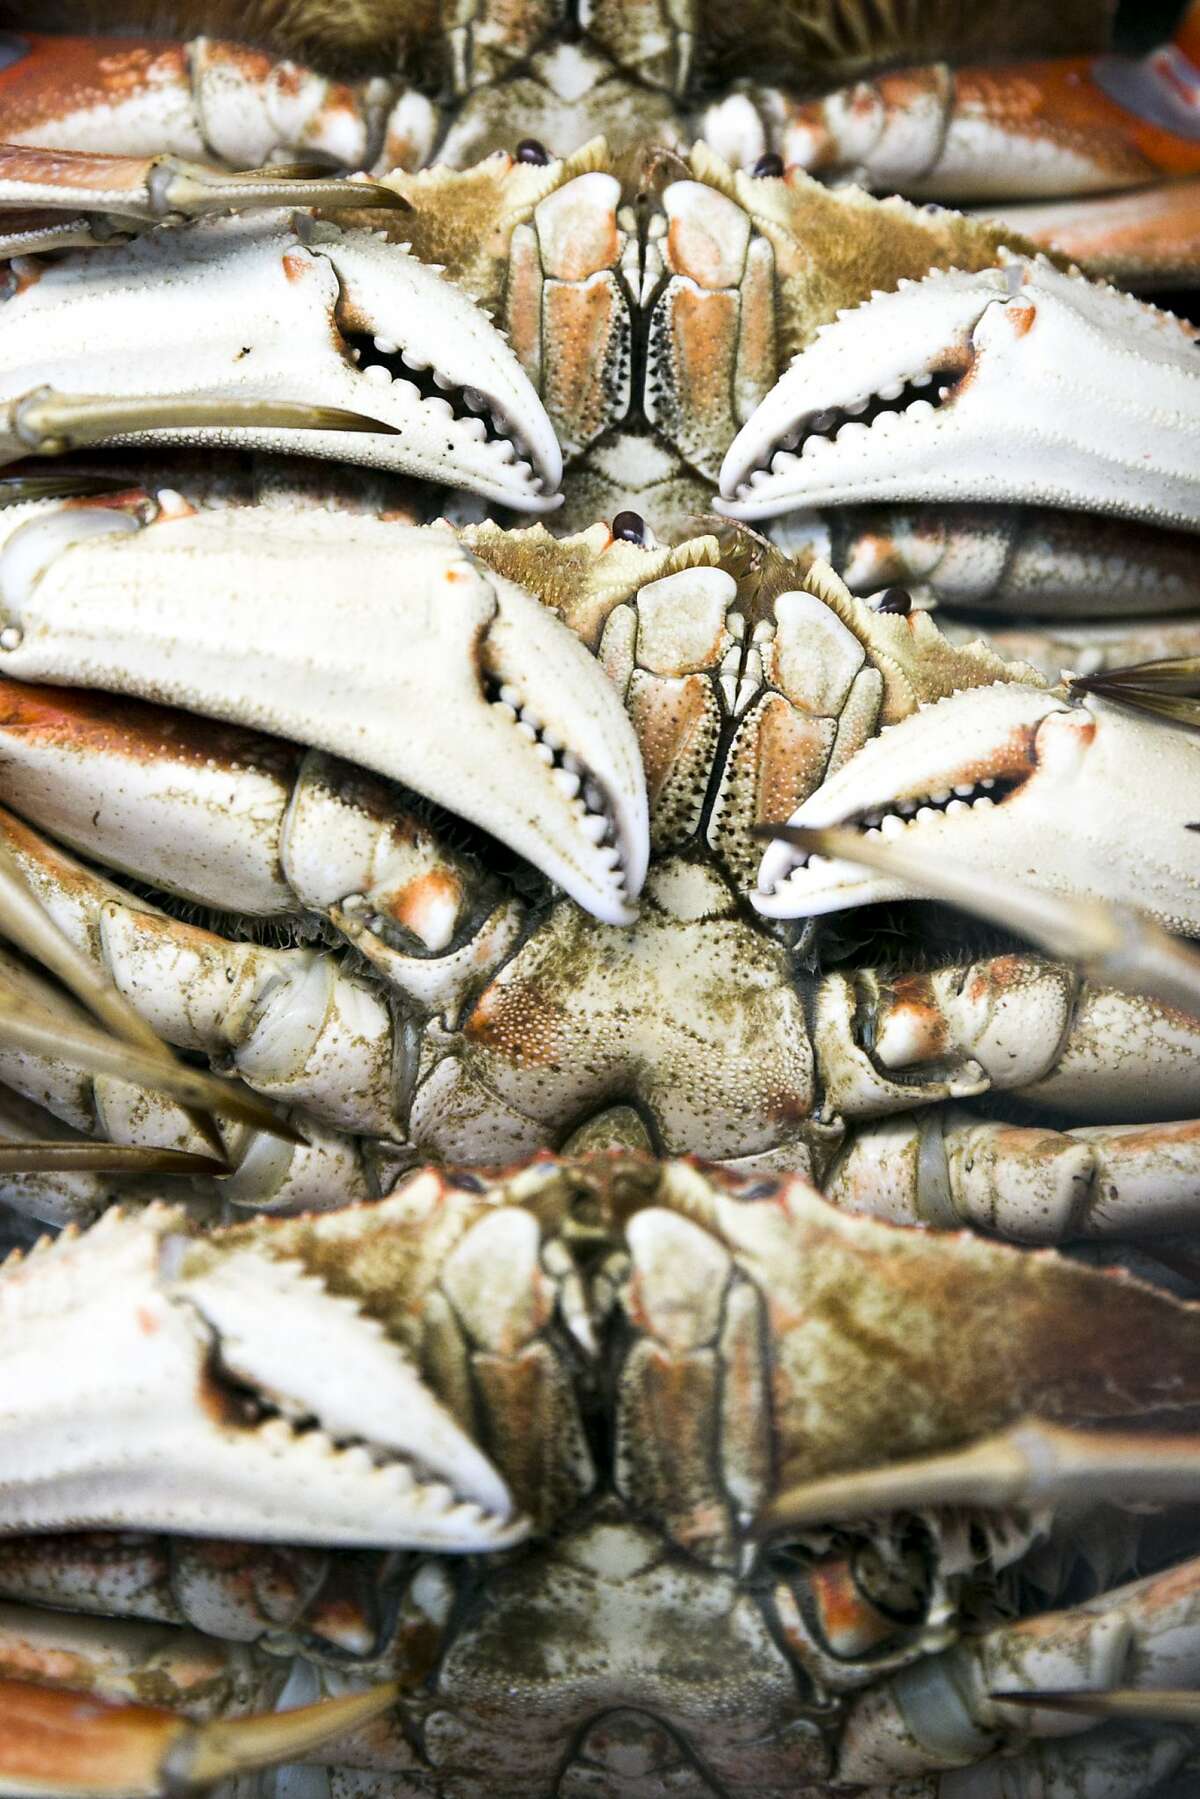 The last closed stretch of Dungeness crab commercial fishing grounds in Northern California will open on Monday, wildlife officials said.